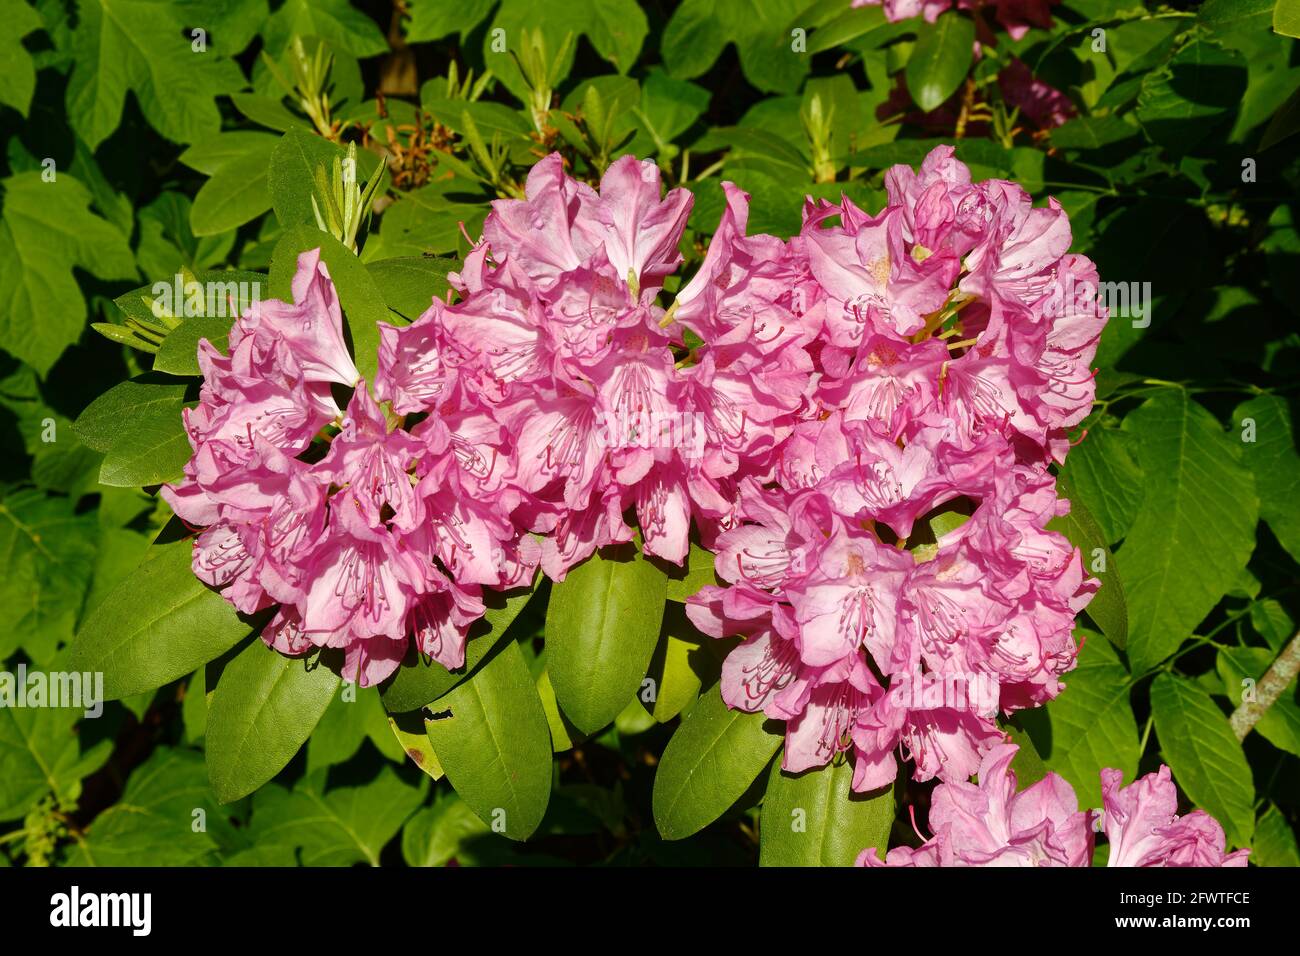 rhododendron, rose color, close-up, shrub, cultivated flowers, large clusters, green leaves, nature, Pennsylvania, spring Stock Photo